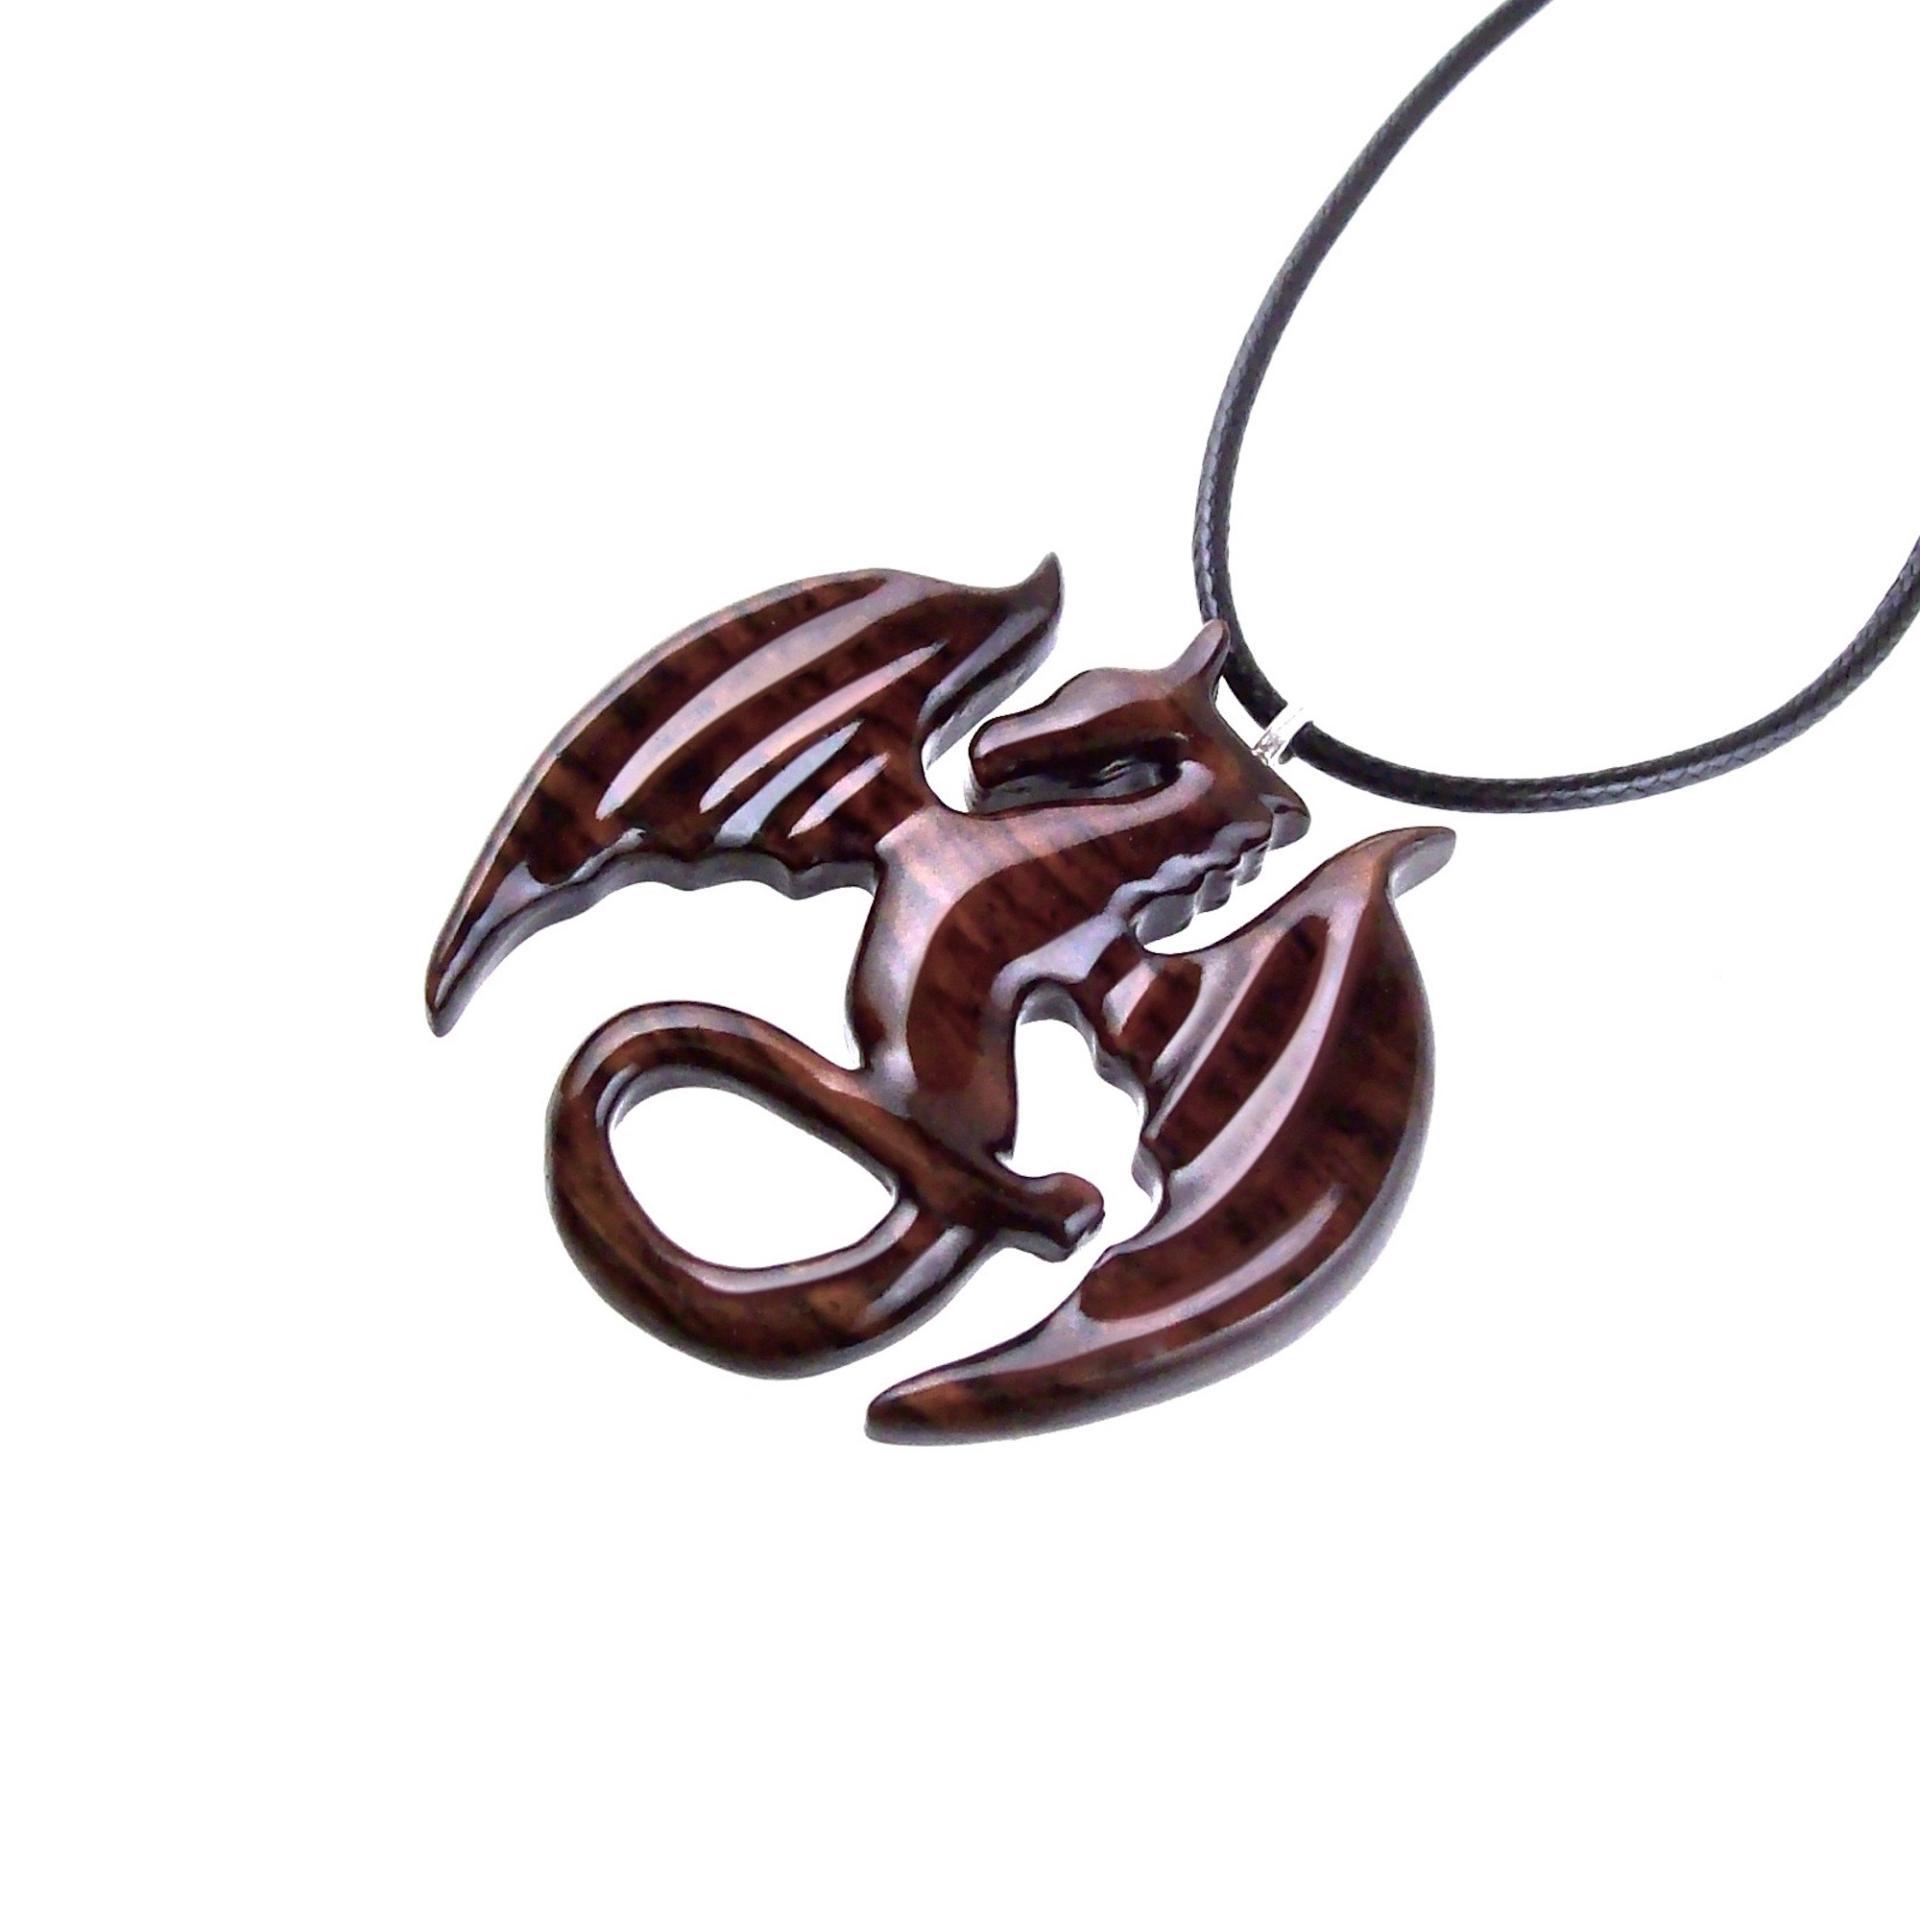 Dragon Necklace for Men or Women, Wooden Dragon Pendant, Hand Carved Wood Fantasy Jewelry, One of a Kind Gift for Him Her